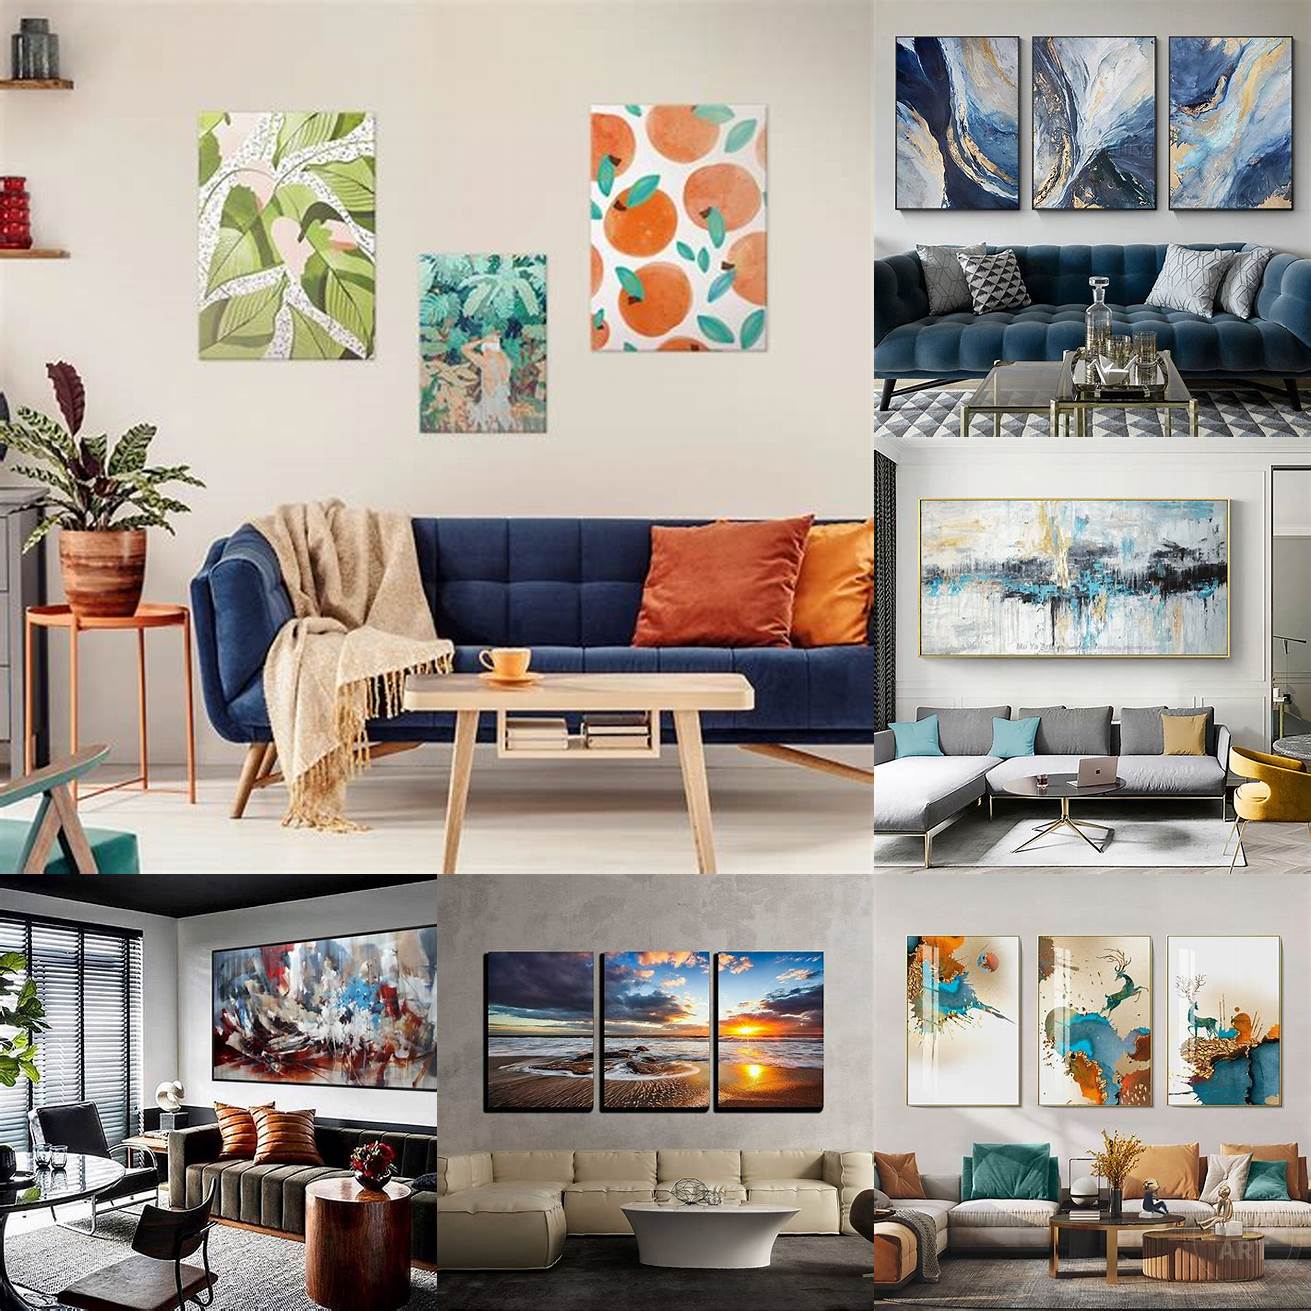 Artwork and wall decor Artwork and wall decor can add some personality and style to your living space You can choose a piece of artwork or wall decor that complements the color or style of your high back sofa